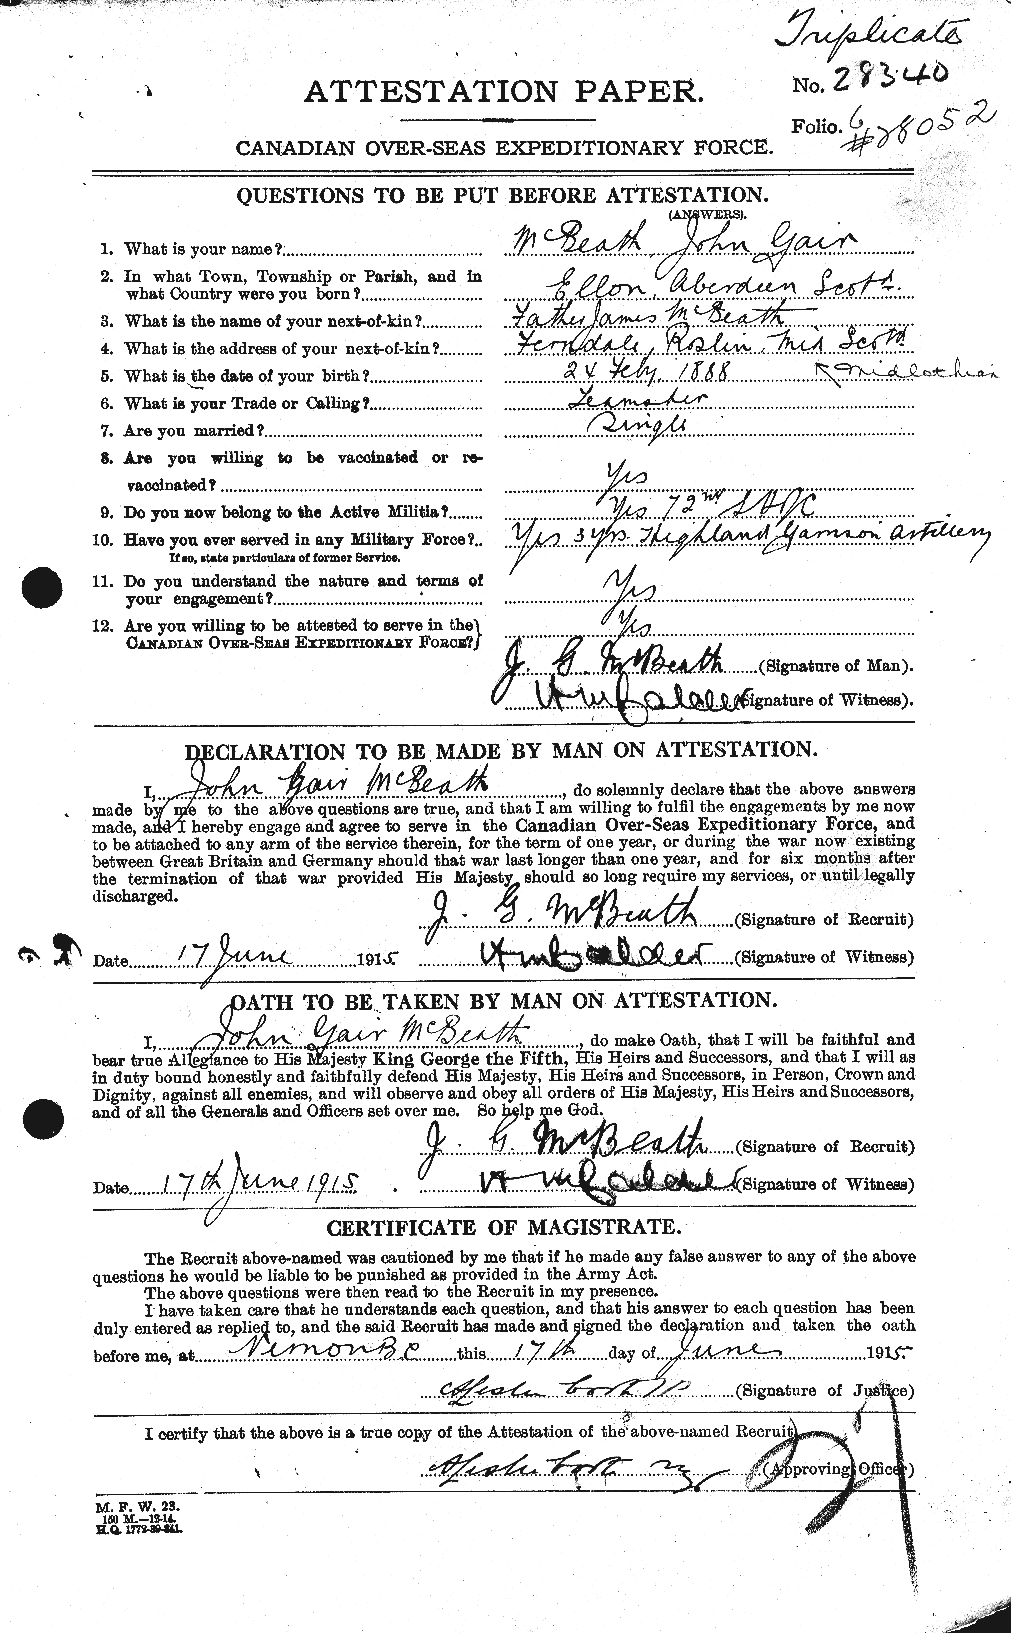 Personnel Records of the First World War - CEF 132380a